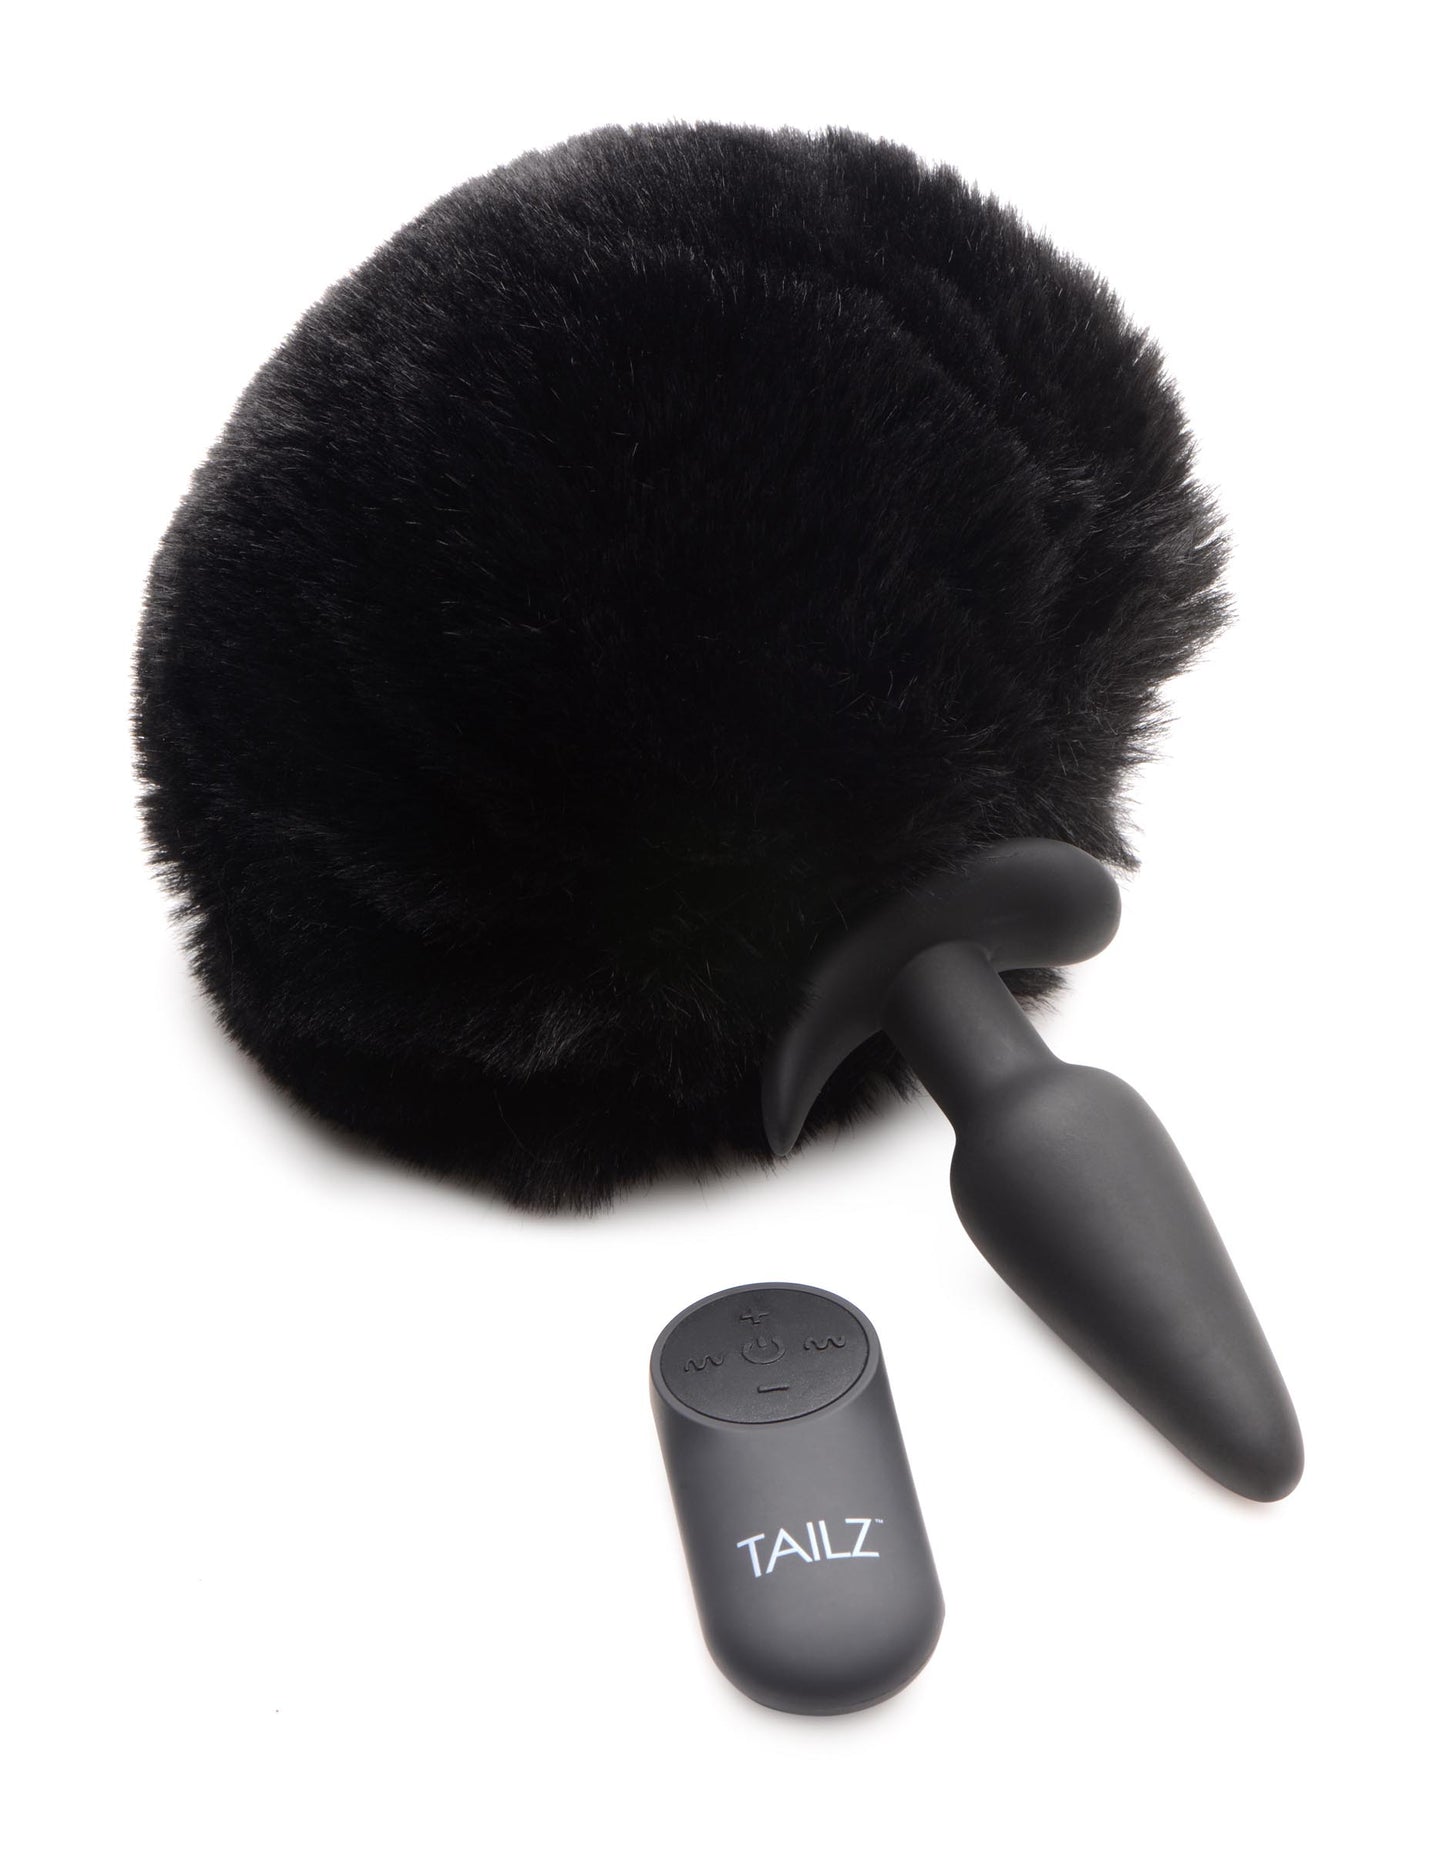 Small Vibrating Anal Plug With Interchangeable Bunny Tail - Black